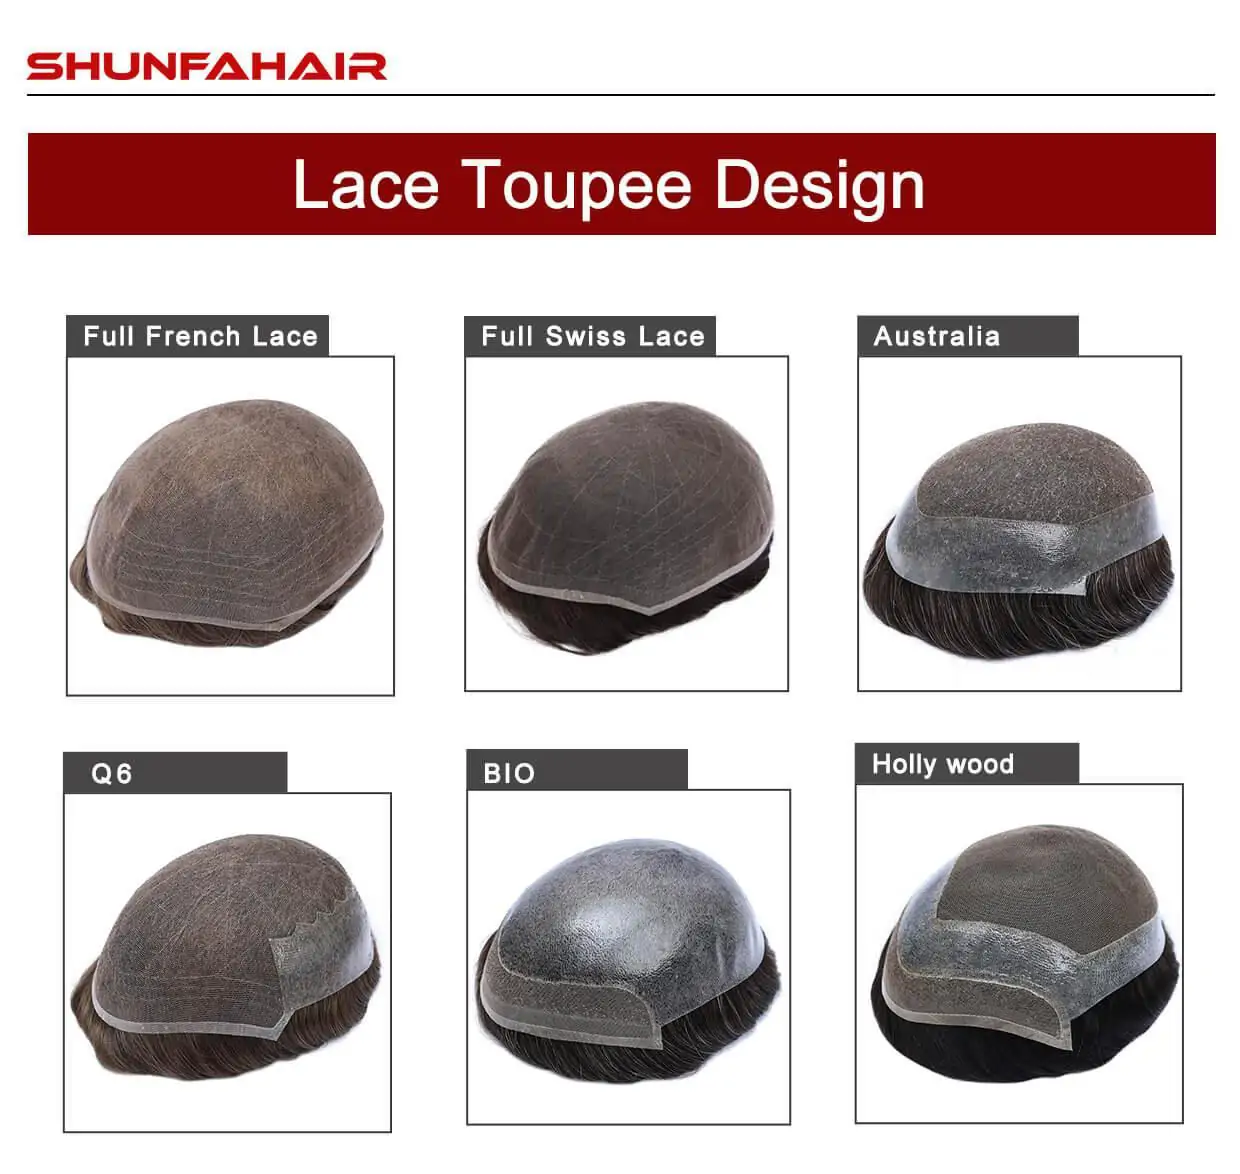 Lace TOUPEE design from shunfahair.webp